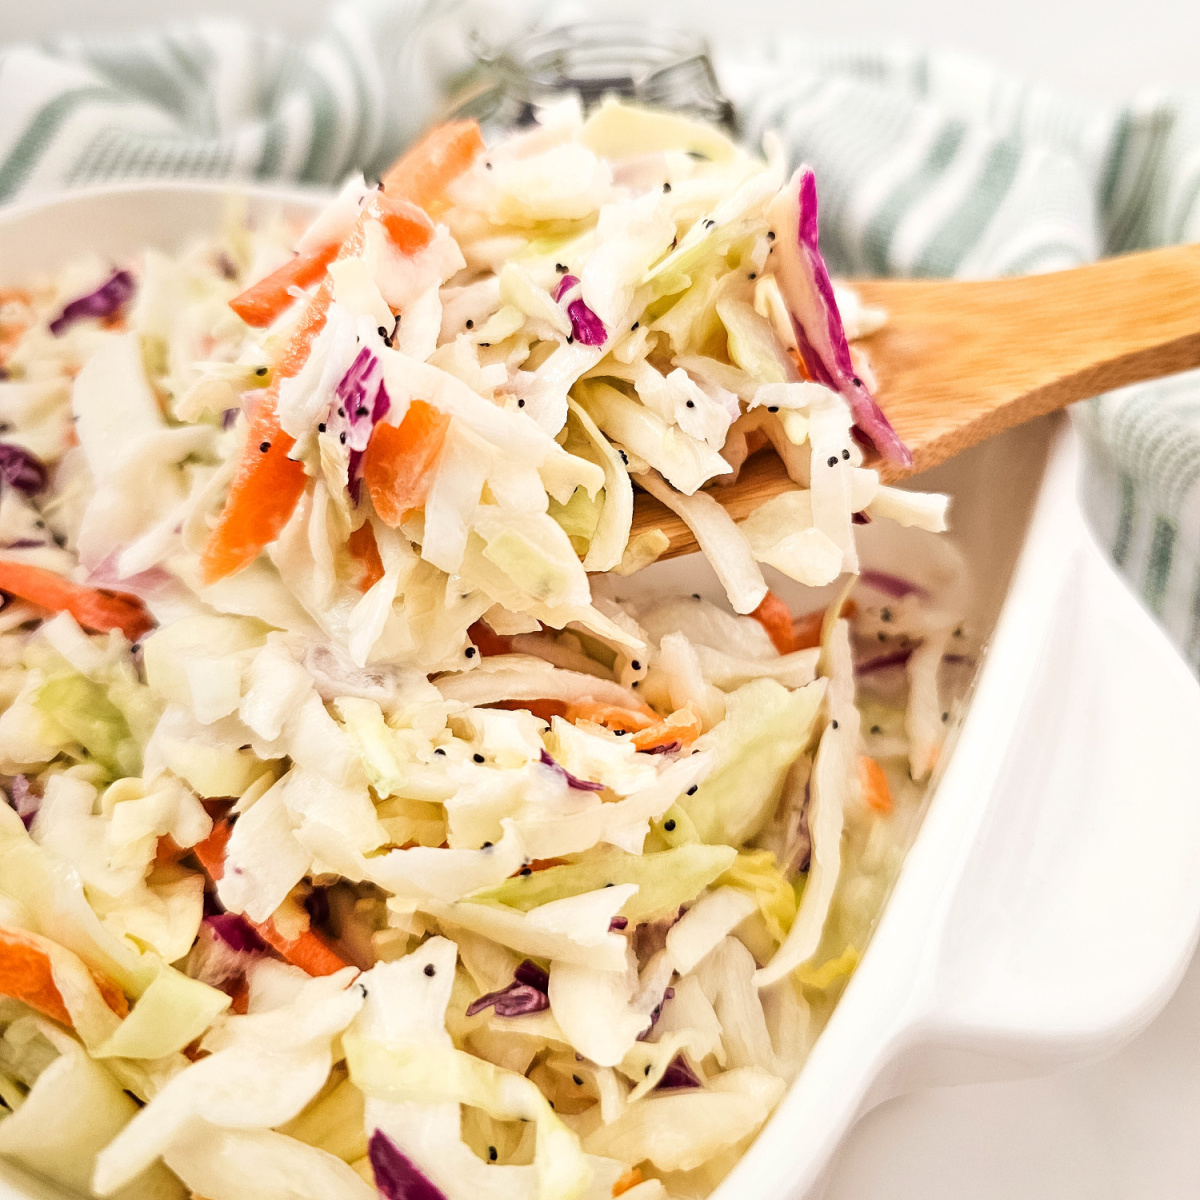 feature image of creamy coleslaw